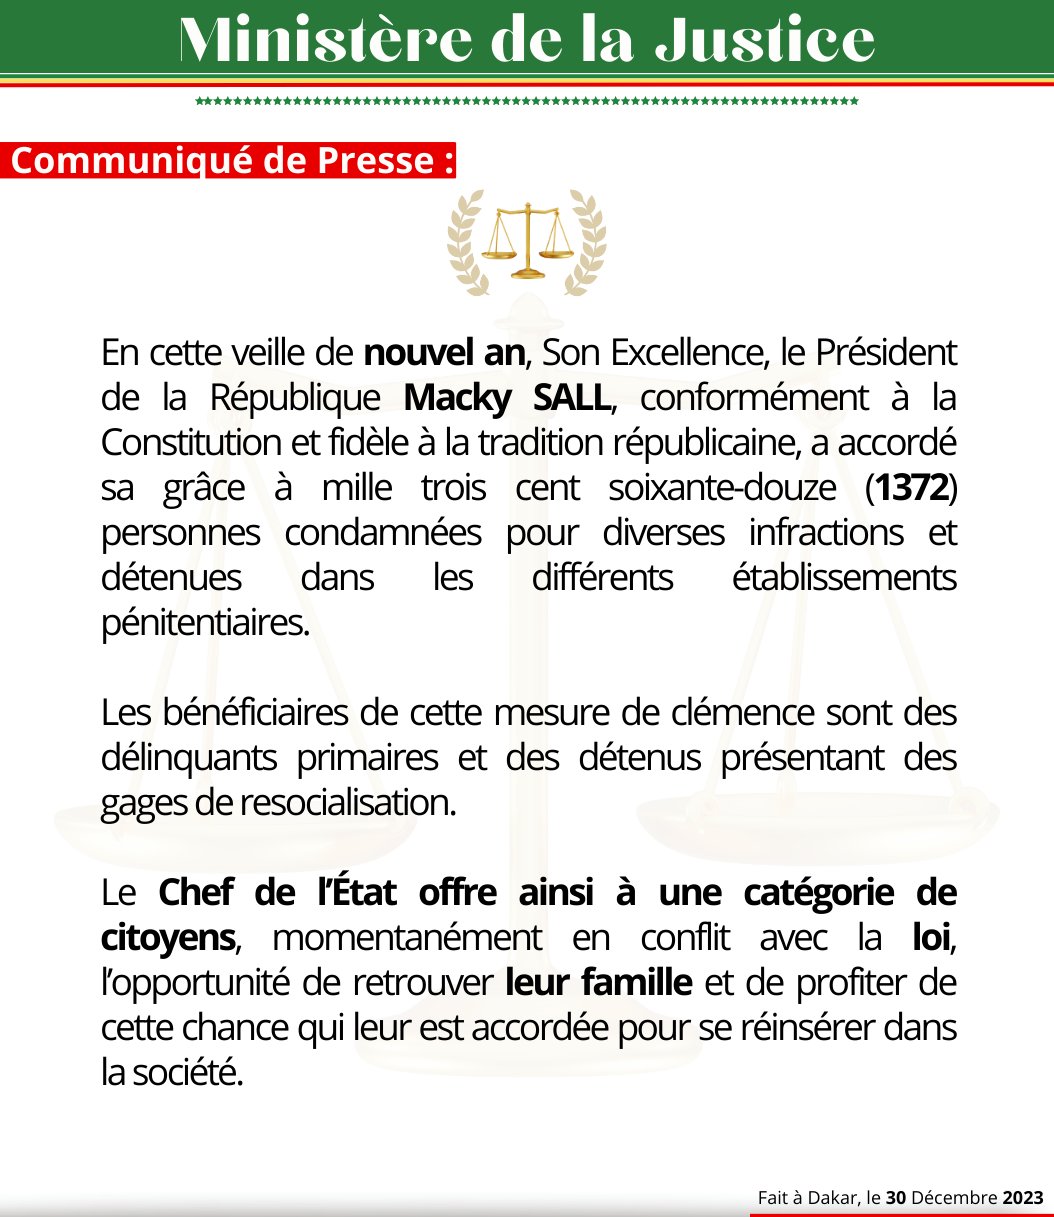 On the eve of the New Year, His Excellency, President of the Republic Macky SALL, in accordance with the Constitution and true to the republican tradition, has granted clemency to one thousand three hundred and seventy-two (1372) individuals convicted of various offenses and held in various penal institutions.

The beneficiaries of this act of mercy include first-time offenders and inmates demonstrating signs of rehabilitation.

The Head of State thus provides a chance for a certain category of citizens, temporarily in conflict with the law, to reunite with their families and take advantage of this granted opportunity to reintegrate into society.